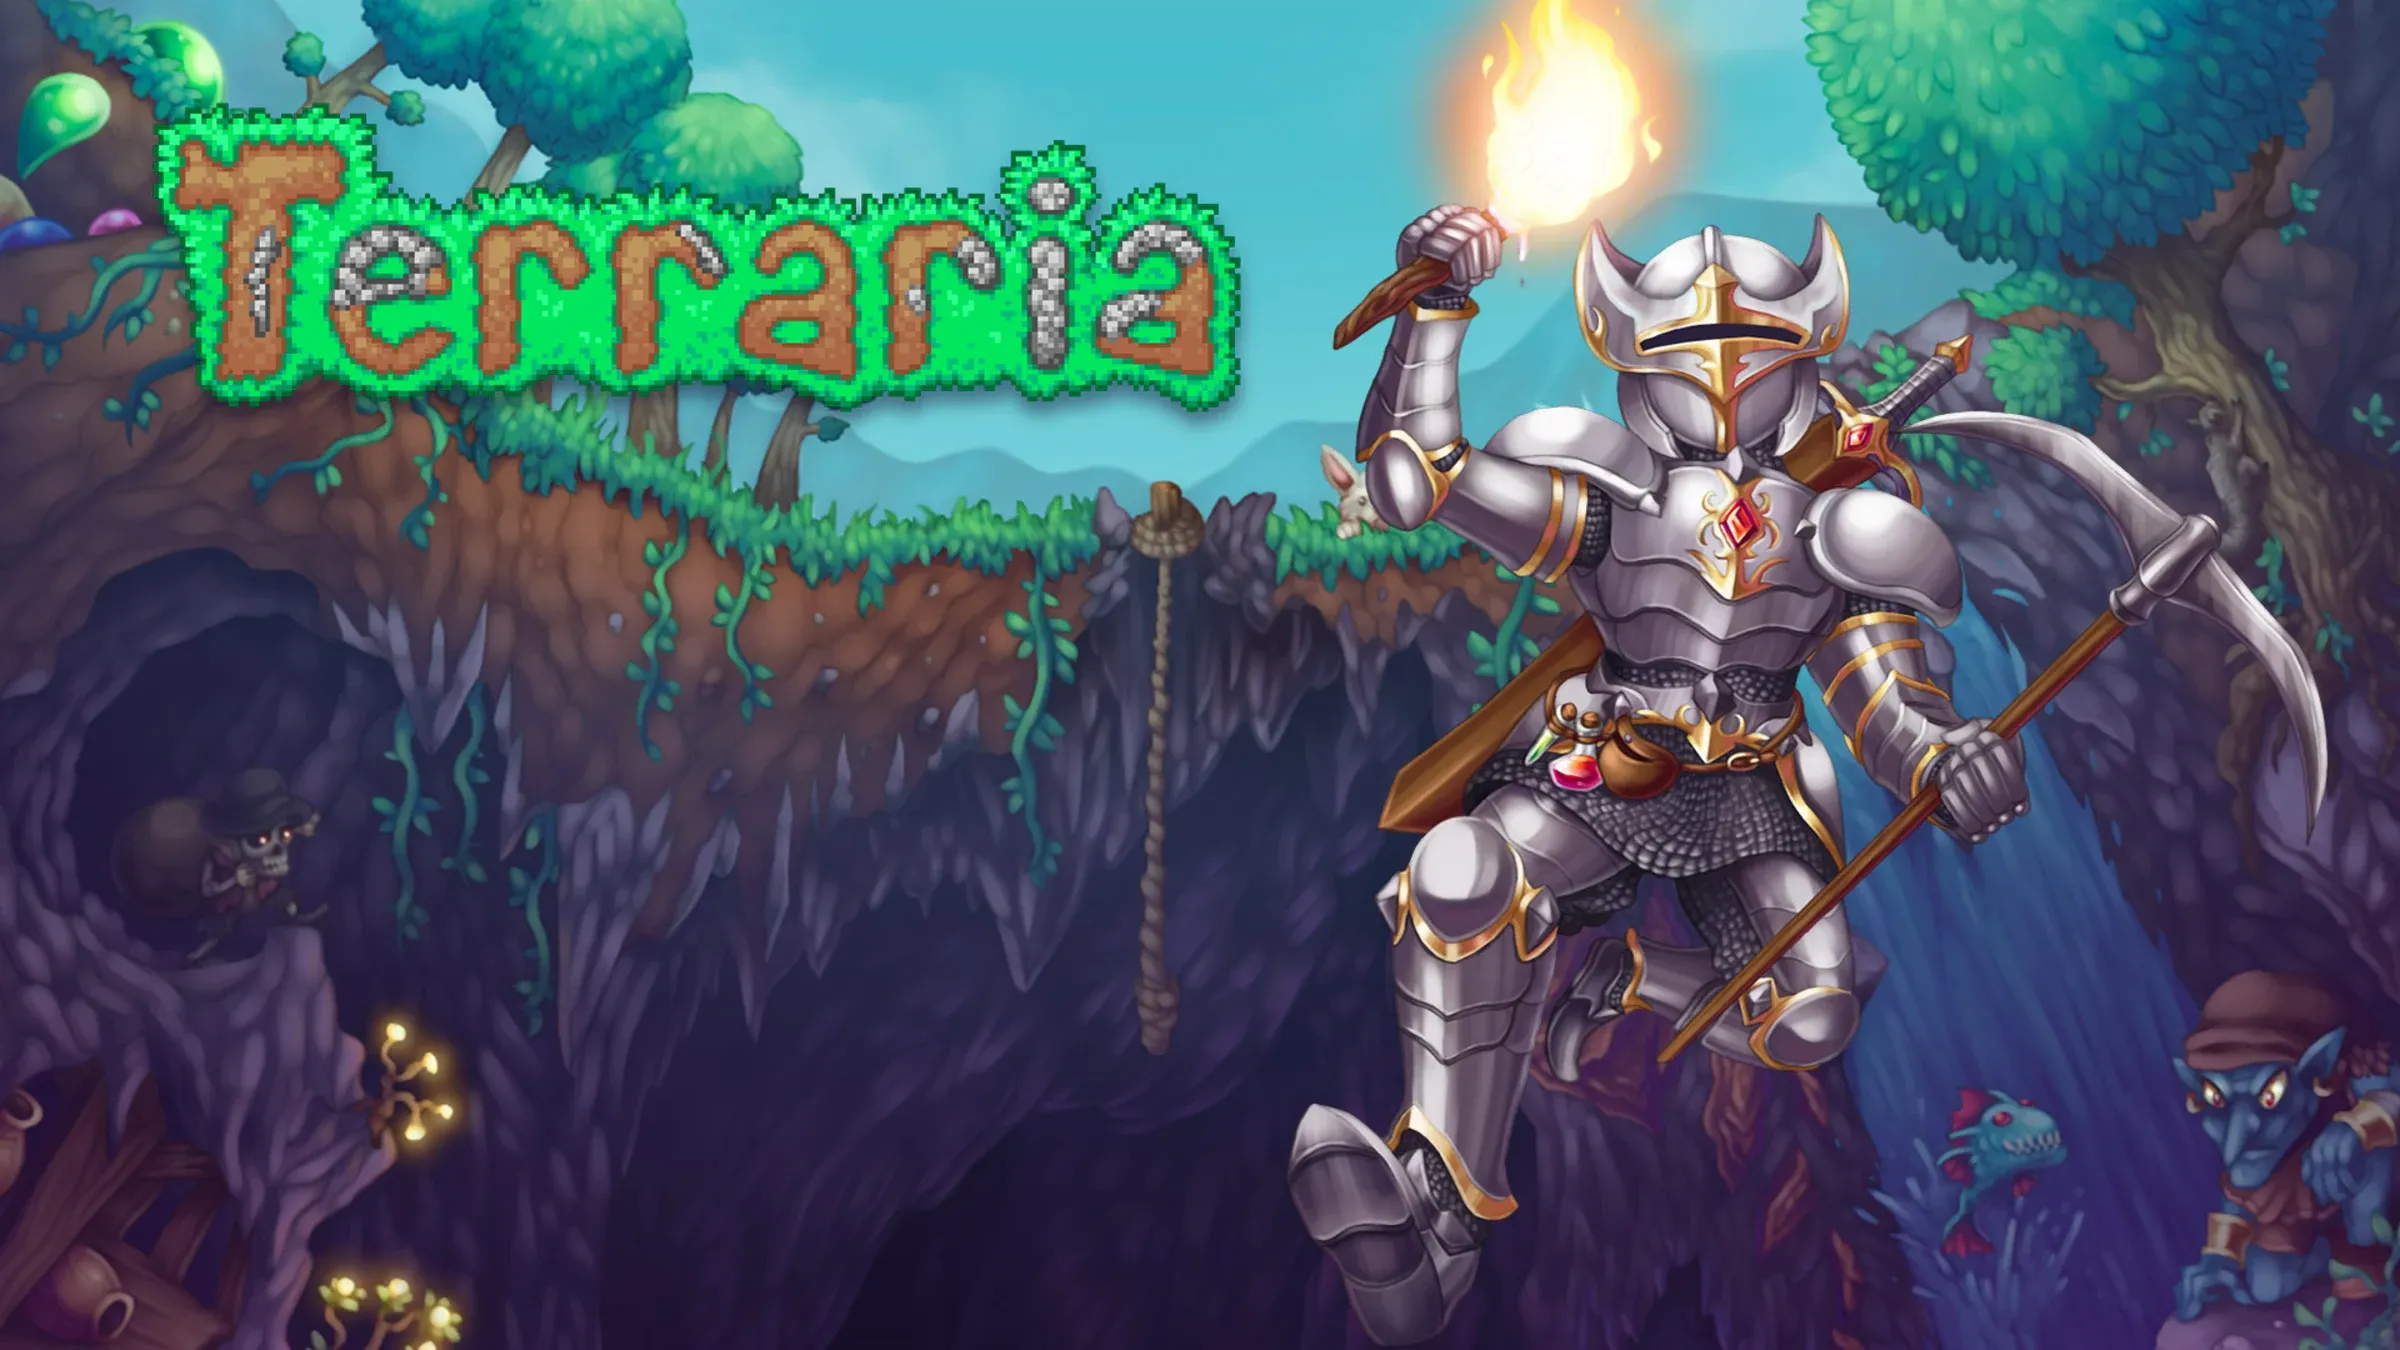 Terraria has over a million reviews on Steam, most of which are positive